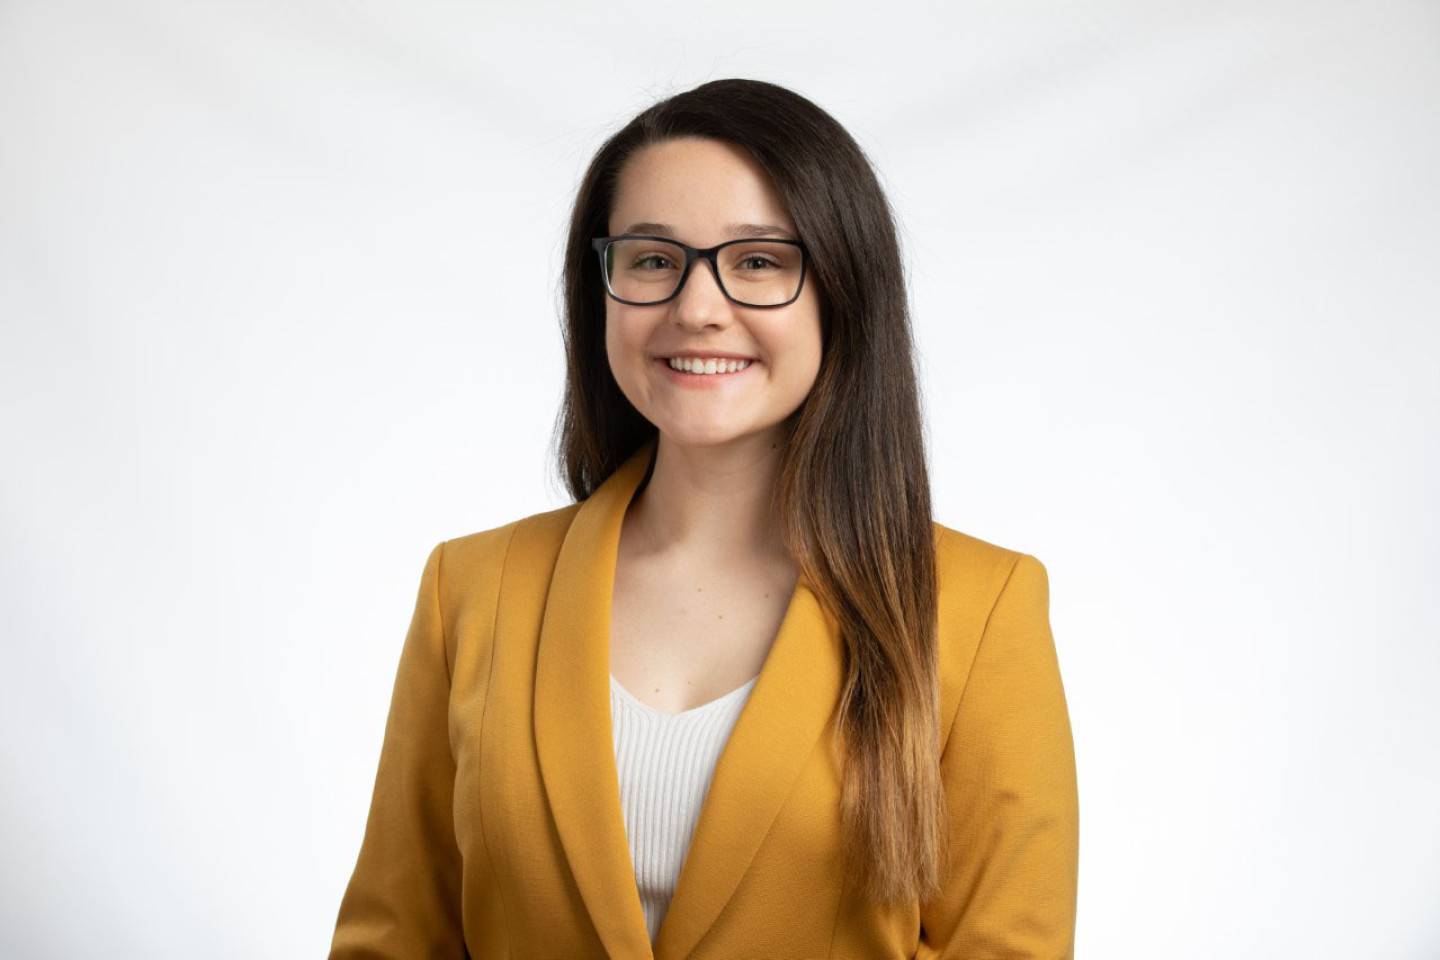 Professional photo of Nicole Miller wearing a yellow blazer against a white background